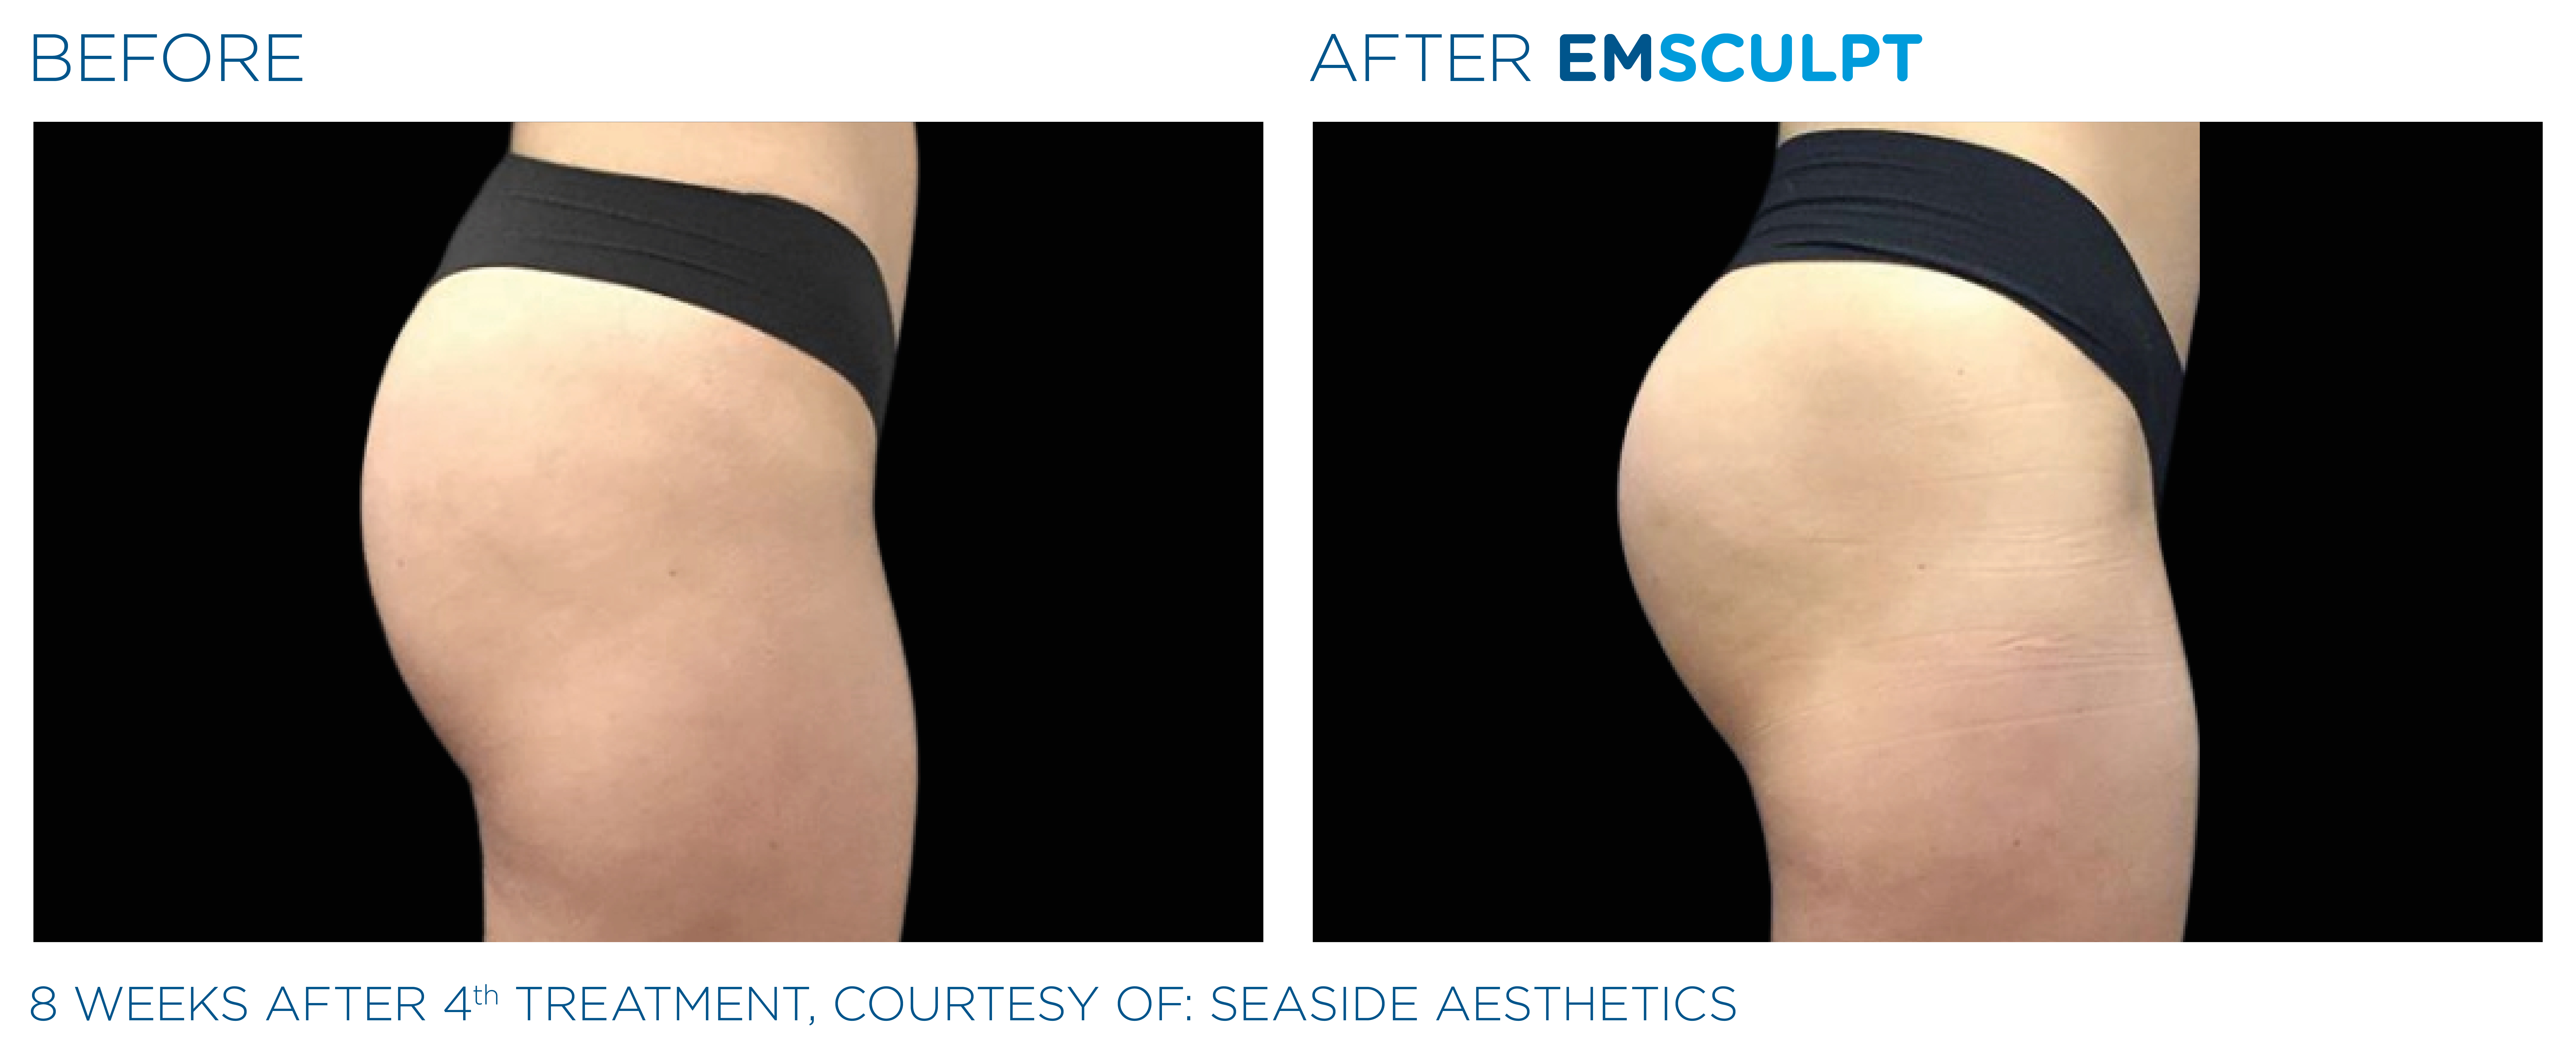 What Is EMSculpt? What to Know About the Body-Contouring Treatment